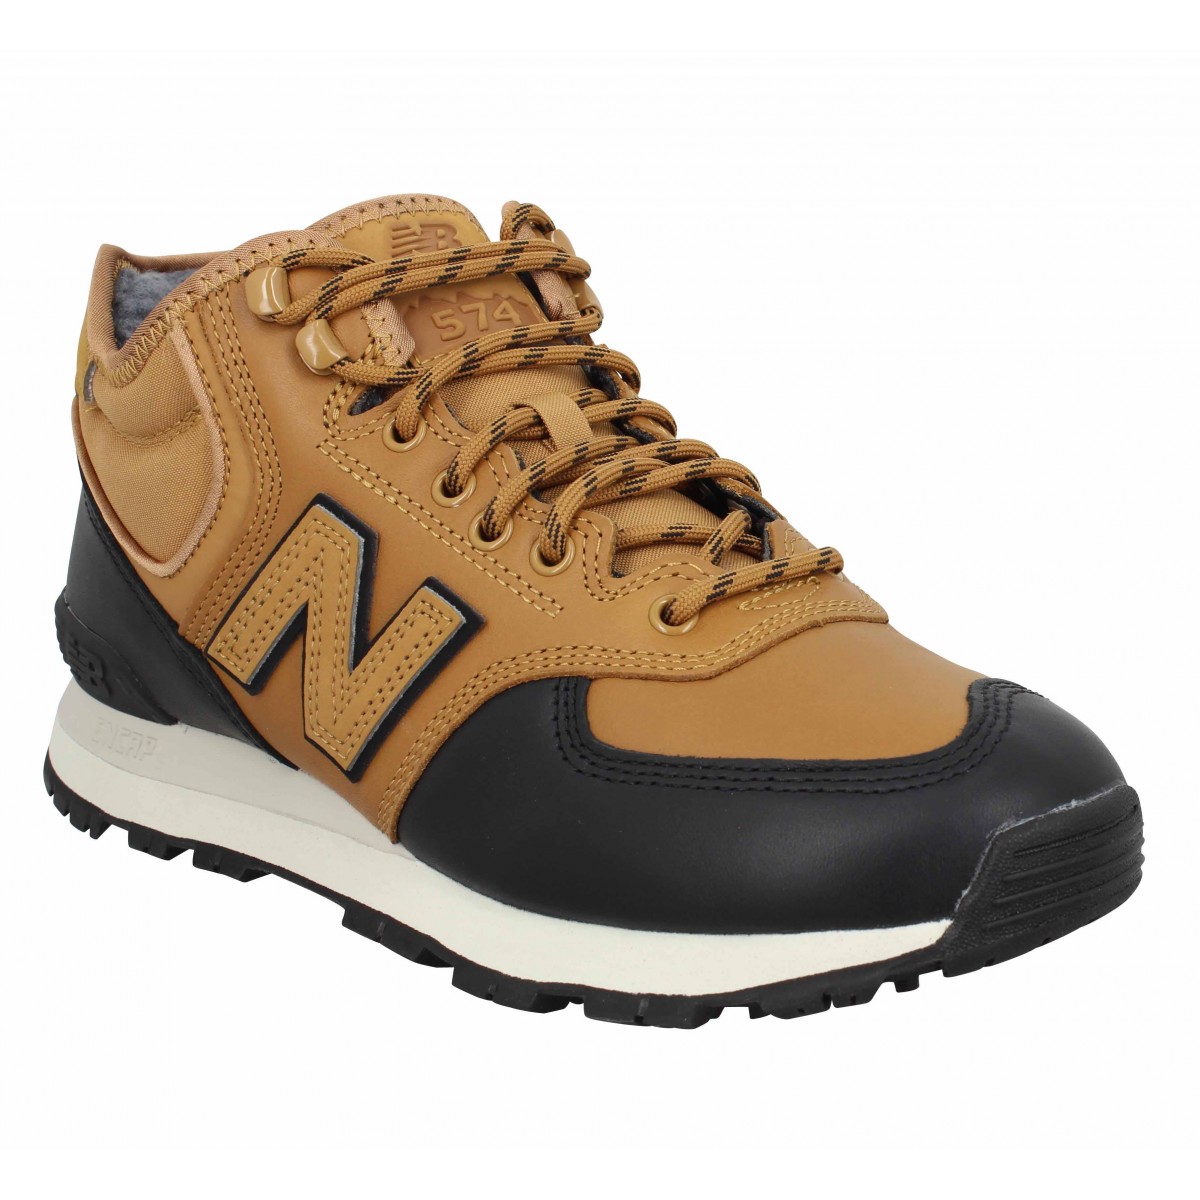 chaussure homme new balance 574